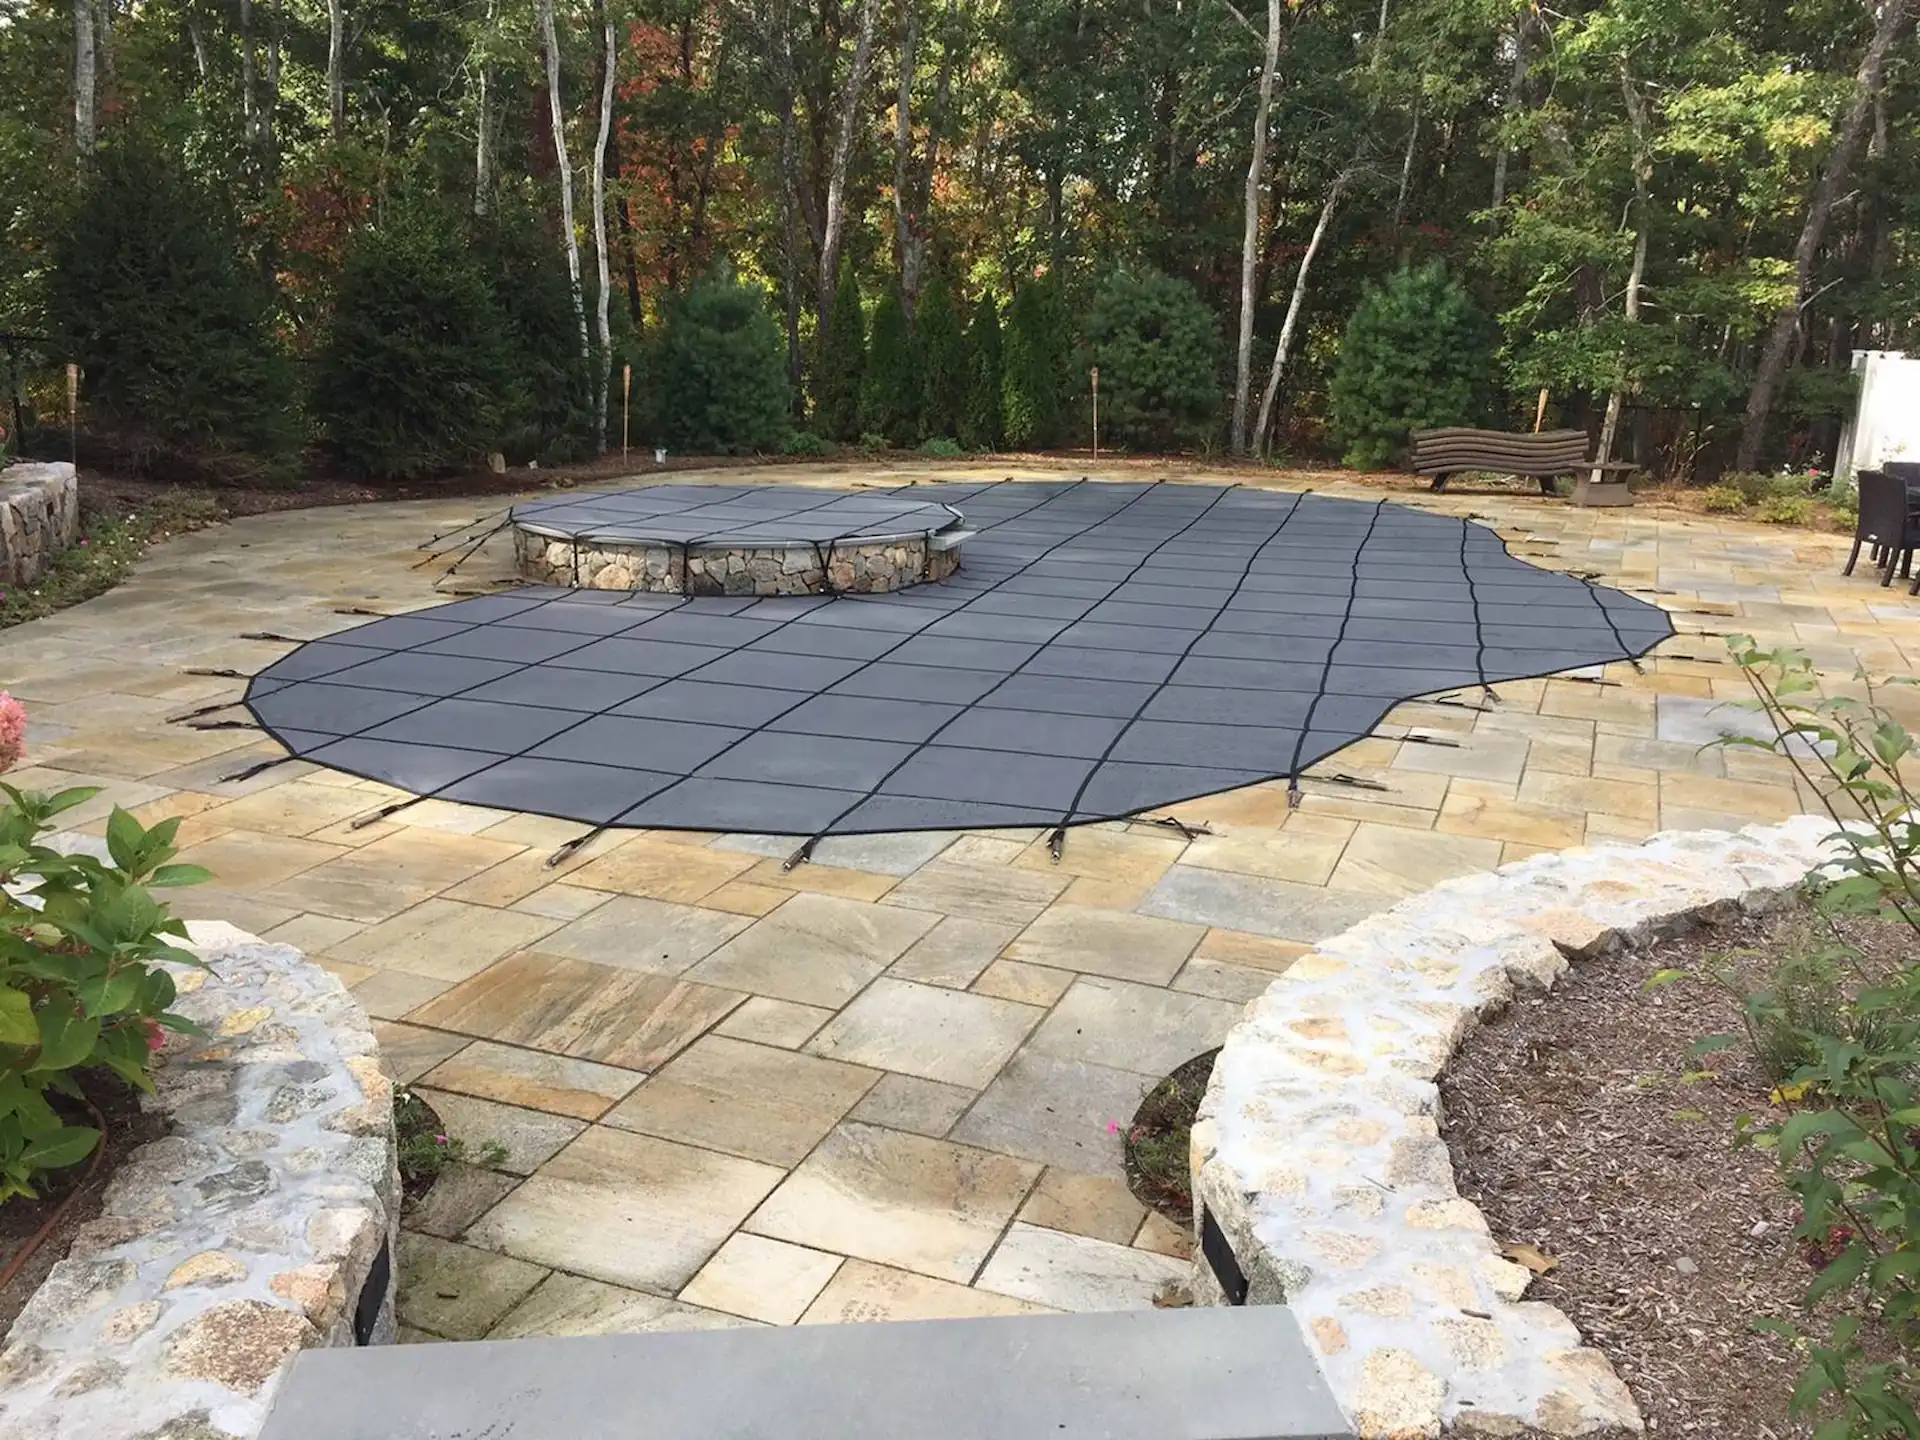 A dark-colored pool safety cover is stretched across a curved inground pool and spa in the Pennsylvania outdoors.